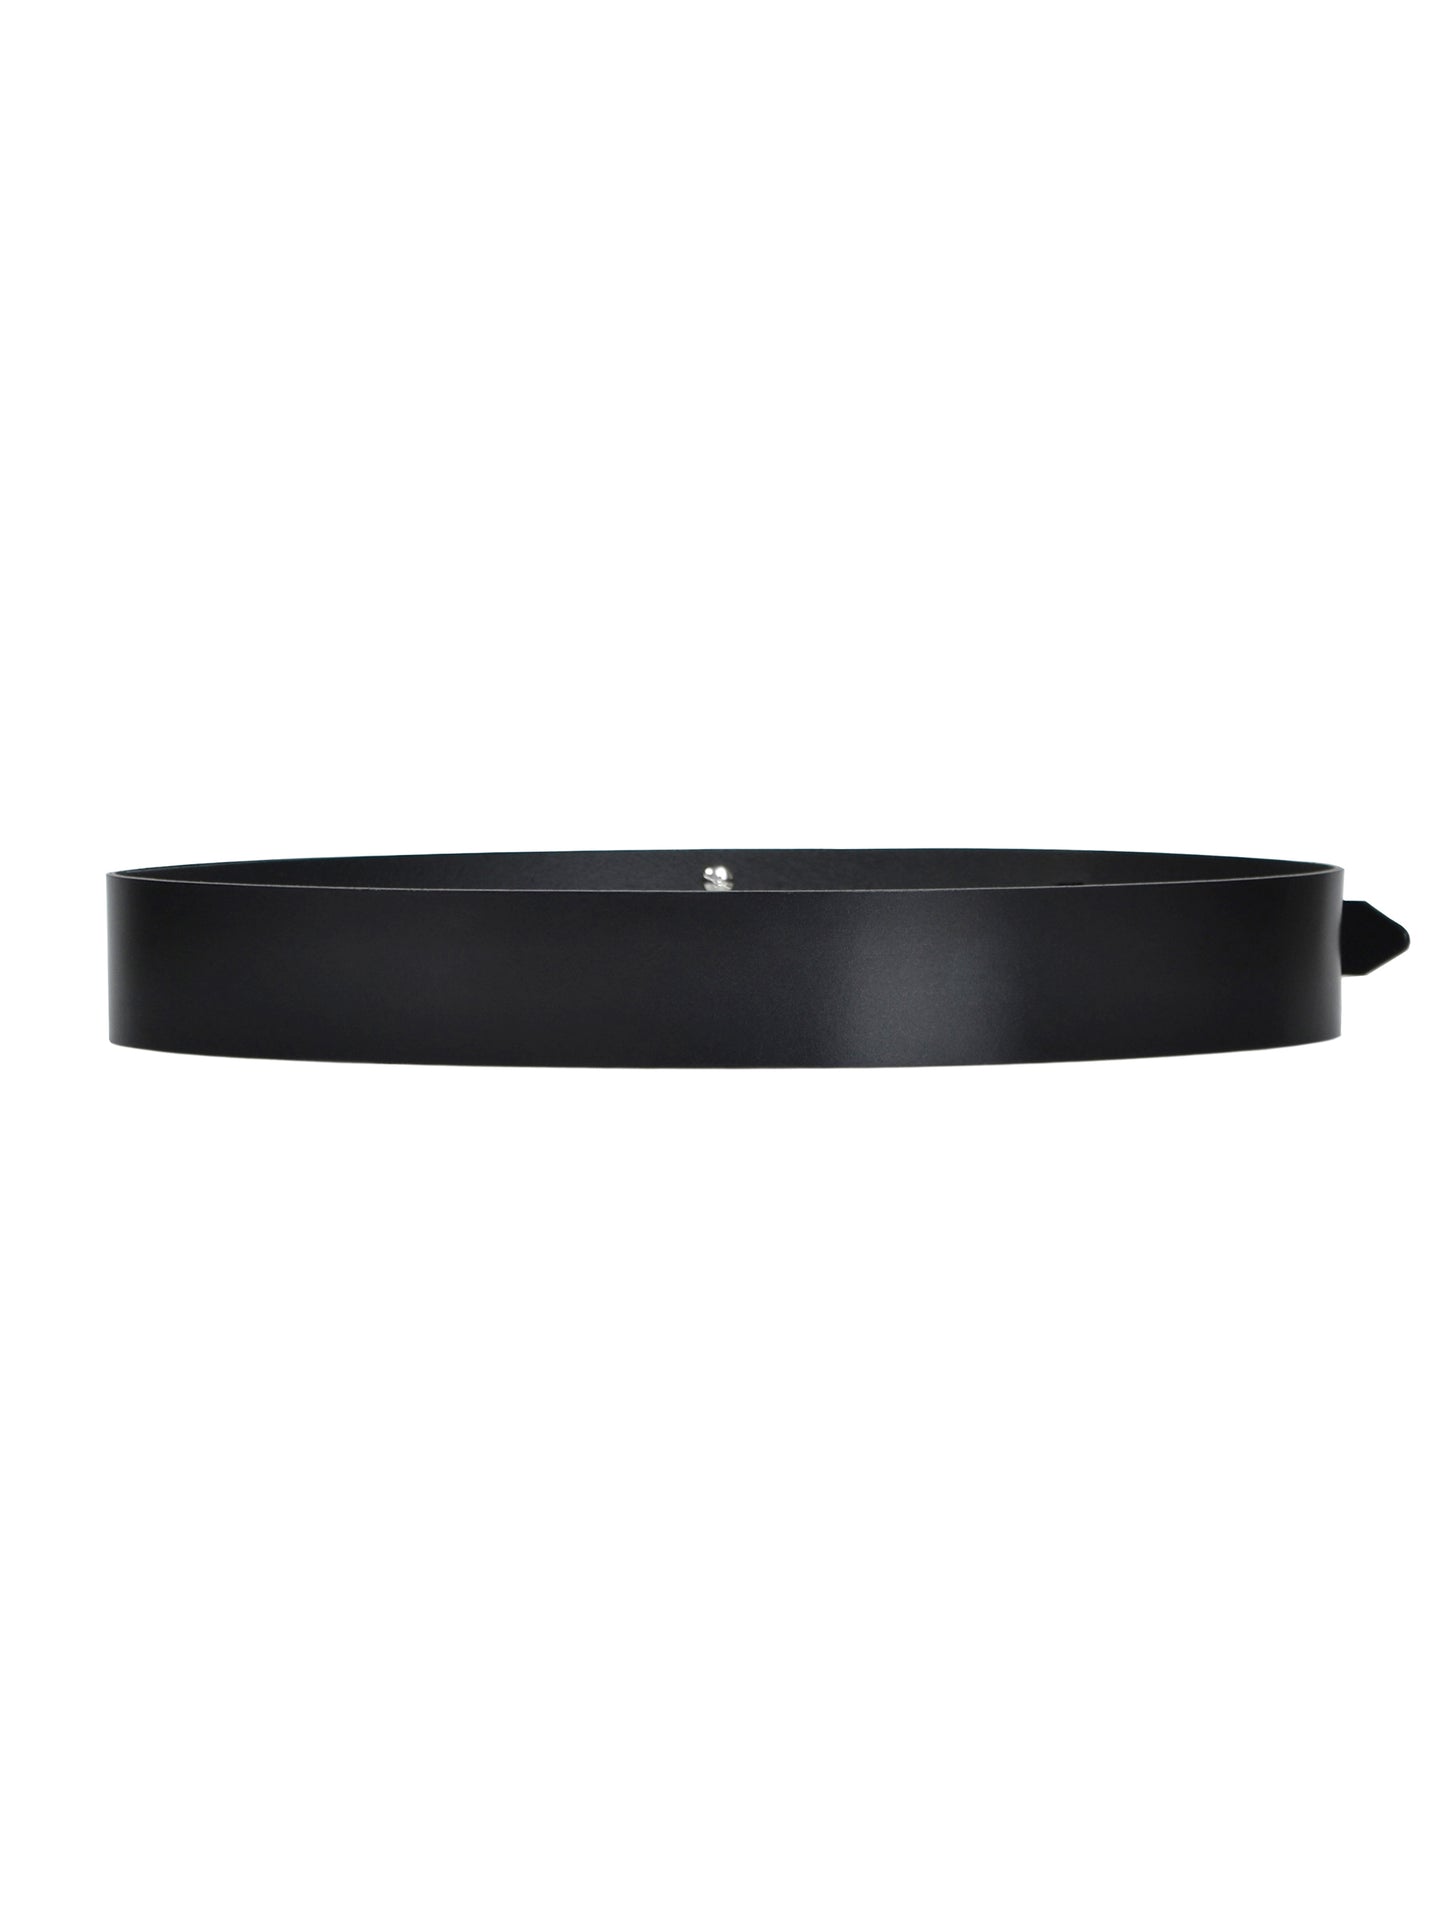 Front view of leather waist belt.